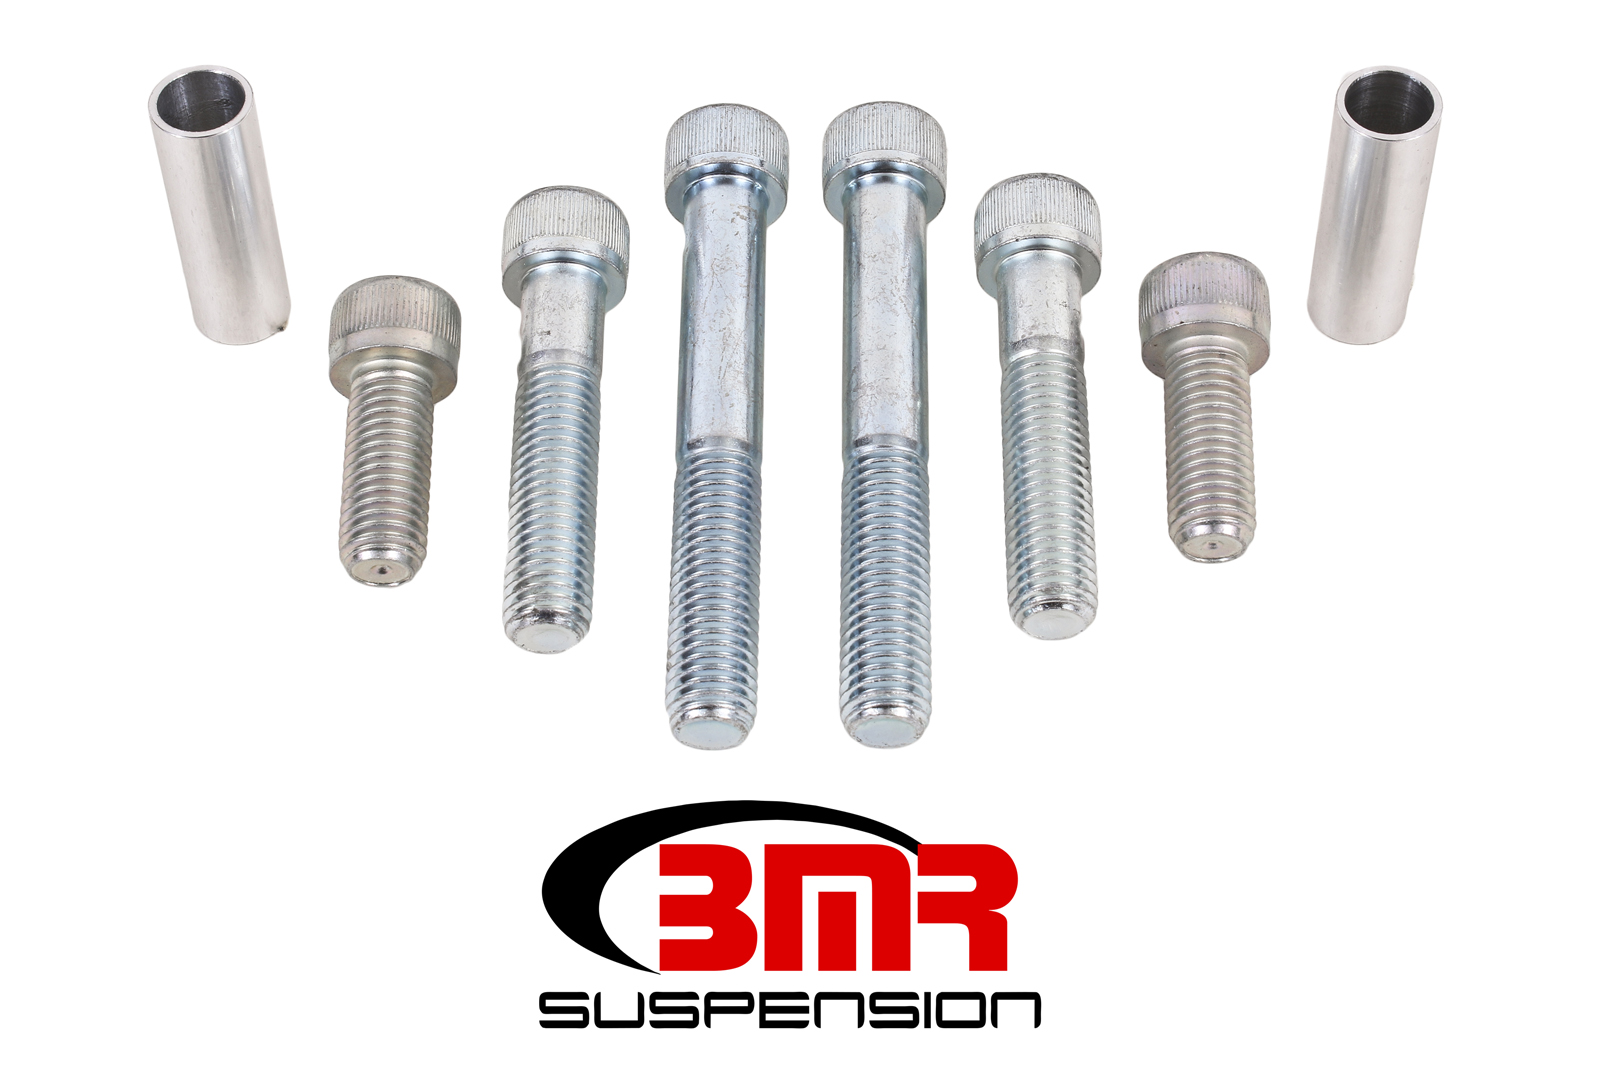 Differential Hardware Upgrade Kit, Aftermarket Insert Kits, Fits all 2015-newer S550 Mustangs, BMR Suspension - RH017